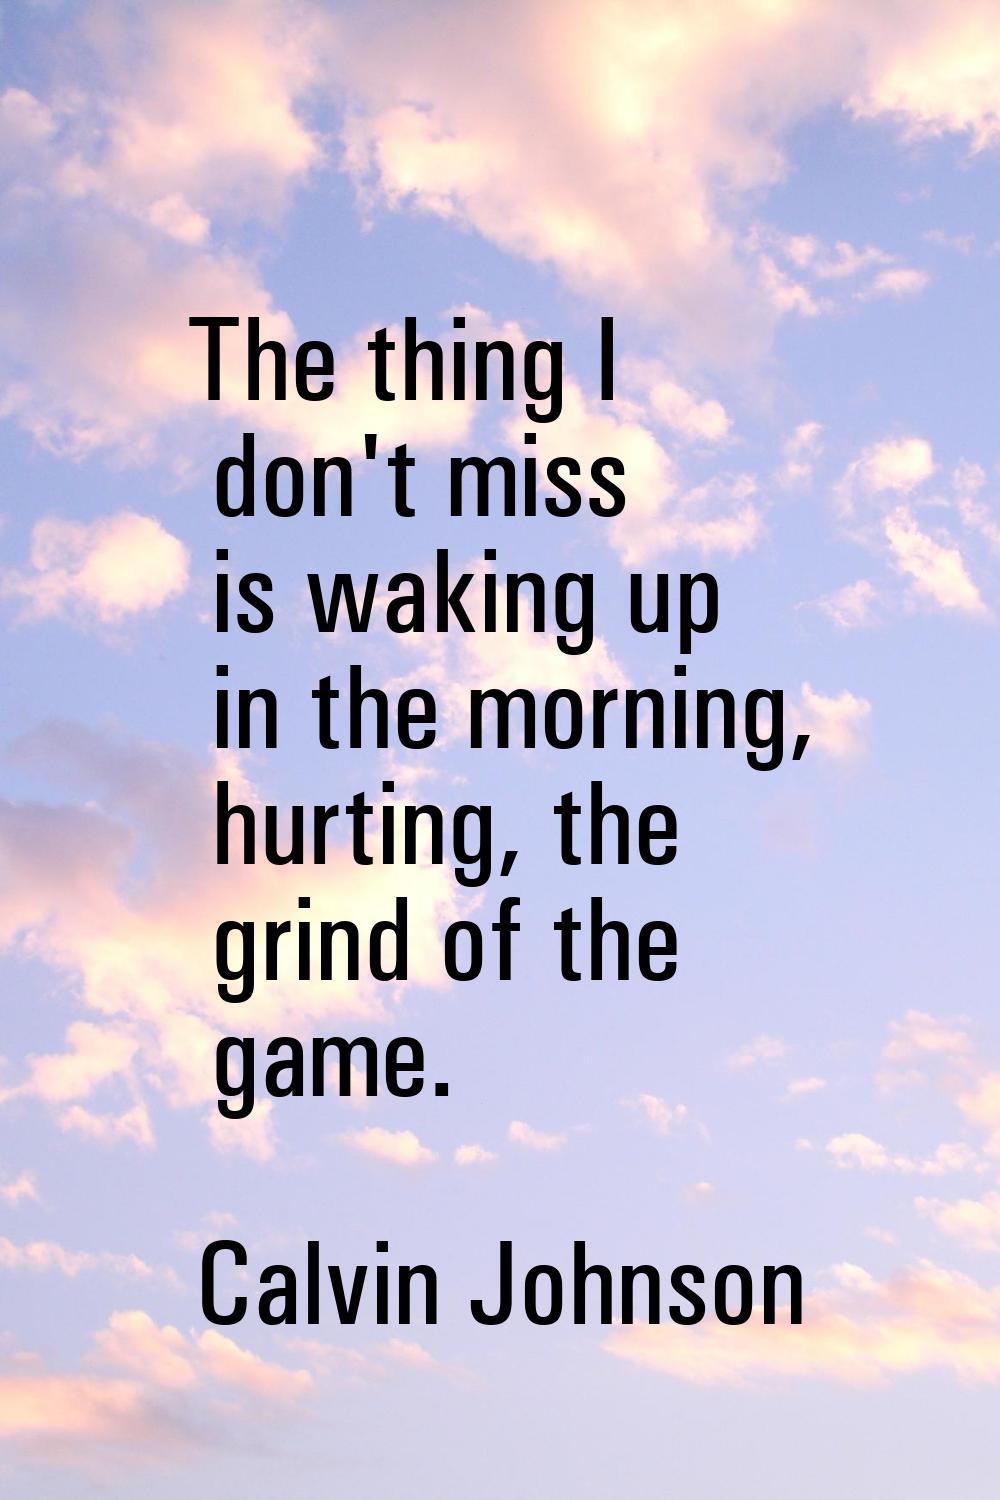 The thing I don't miss is waking up in the morning, hurting, the grind of the game.